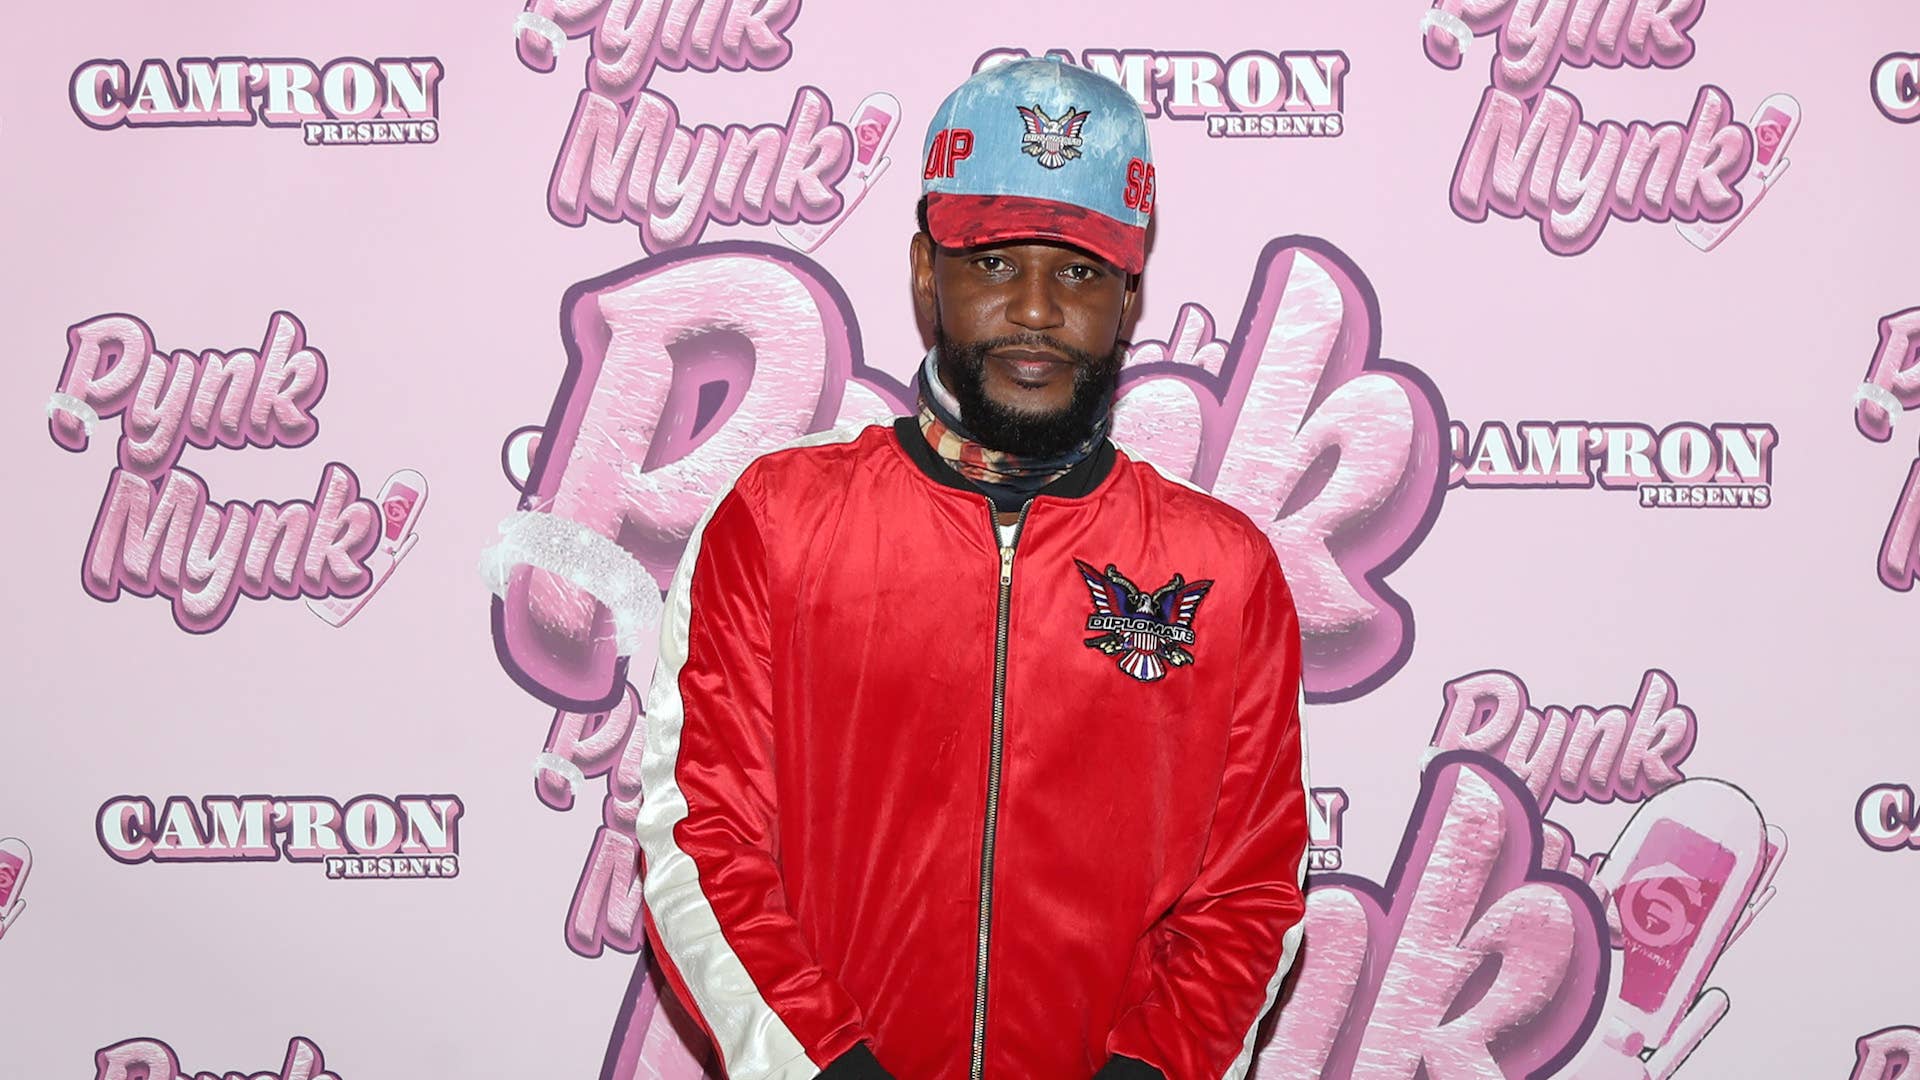 Rapper Cam'ron attends Cam'ron's Pynk Mynk Unveiling at Strains